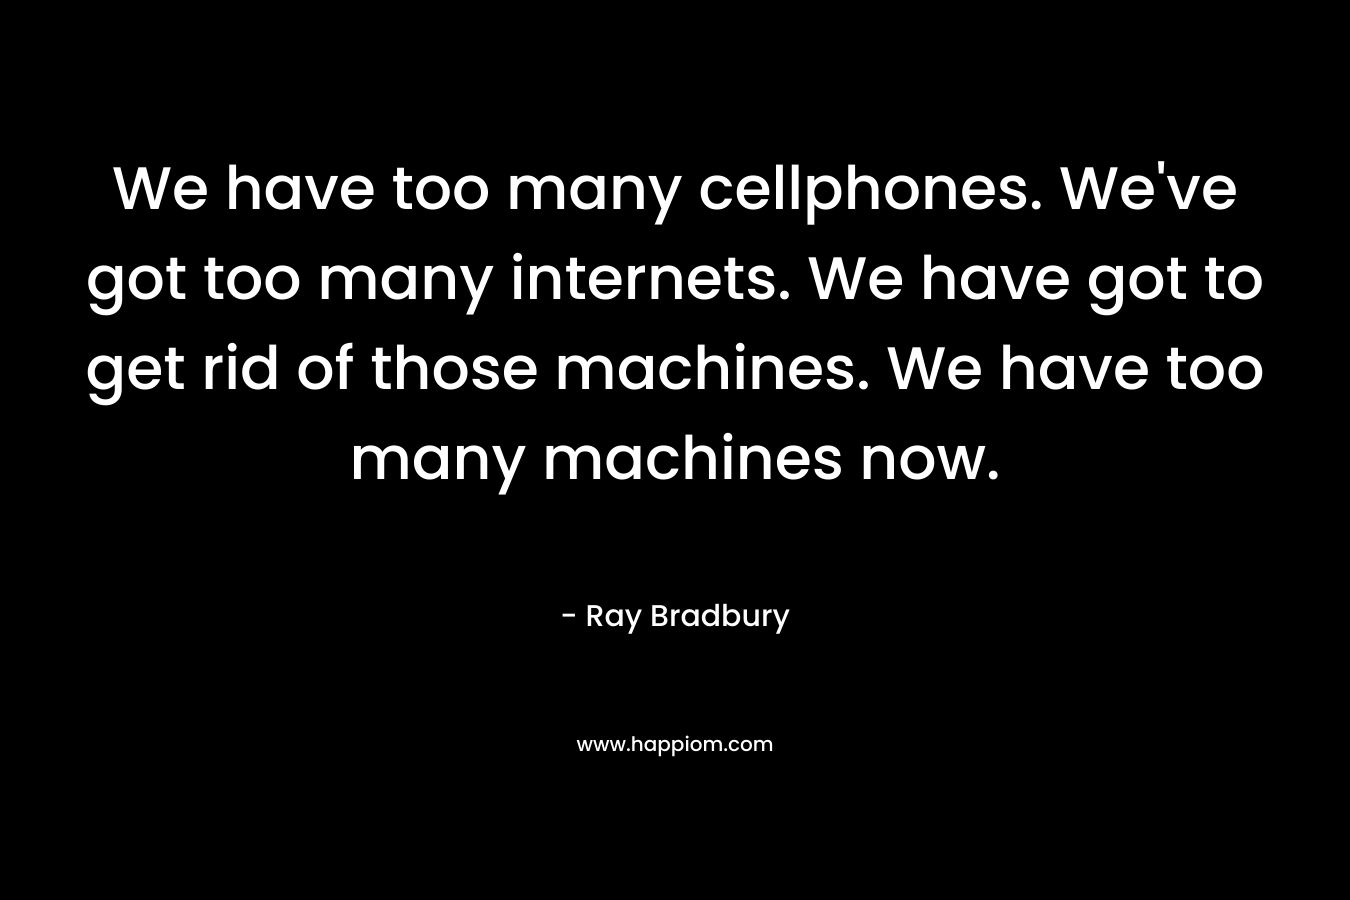 We have too many cellphones. We’ve got too many internets. We have got to get rid of those machines. We have too many machines now. – Ray Bradbury